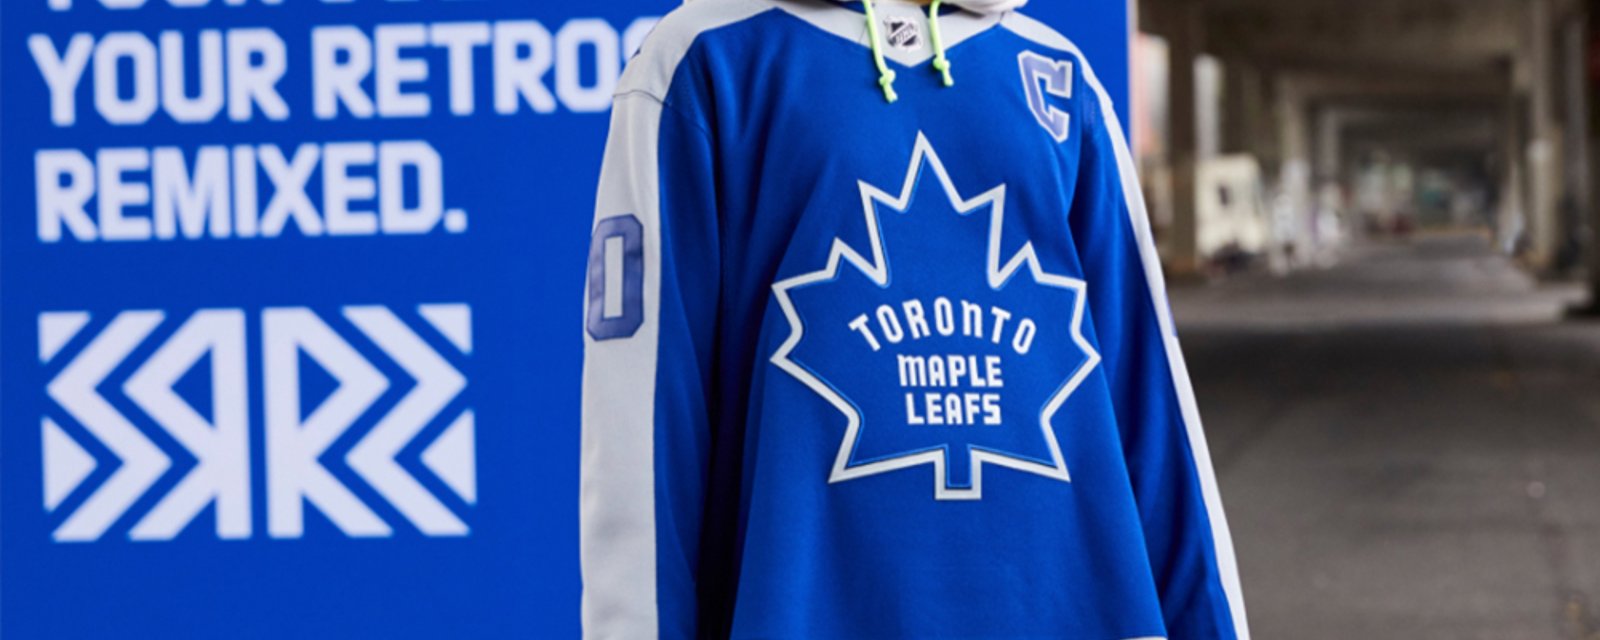 Leafs get mocked mercilessly for glaring mistake on their new retro jerseys